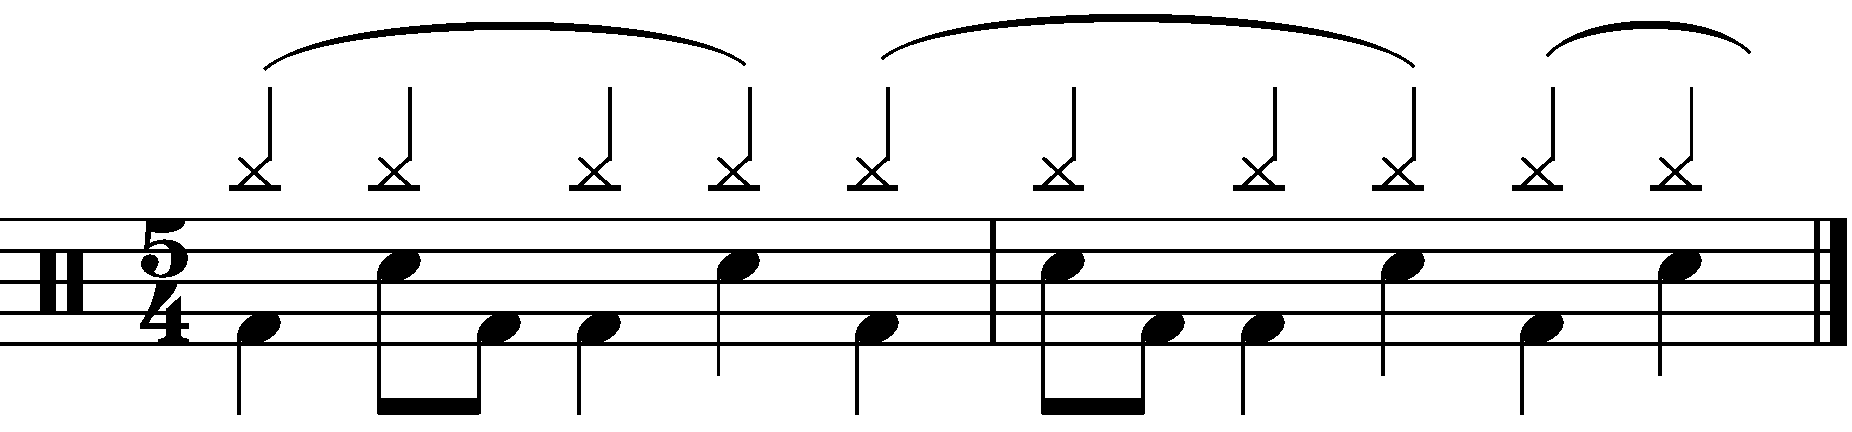 A 5/4 wrap around groove